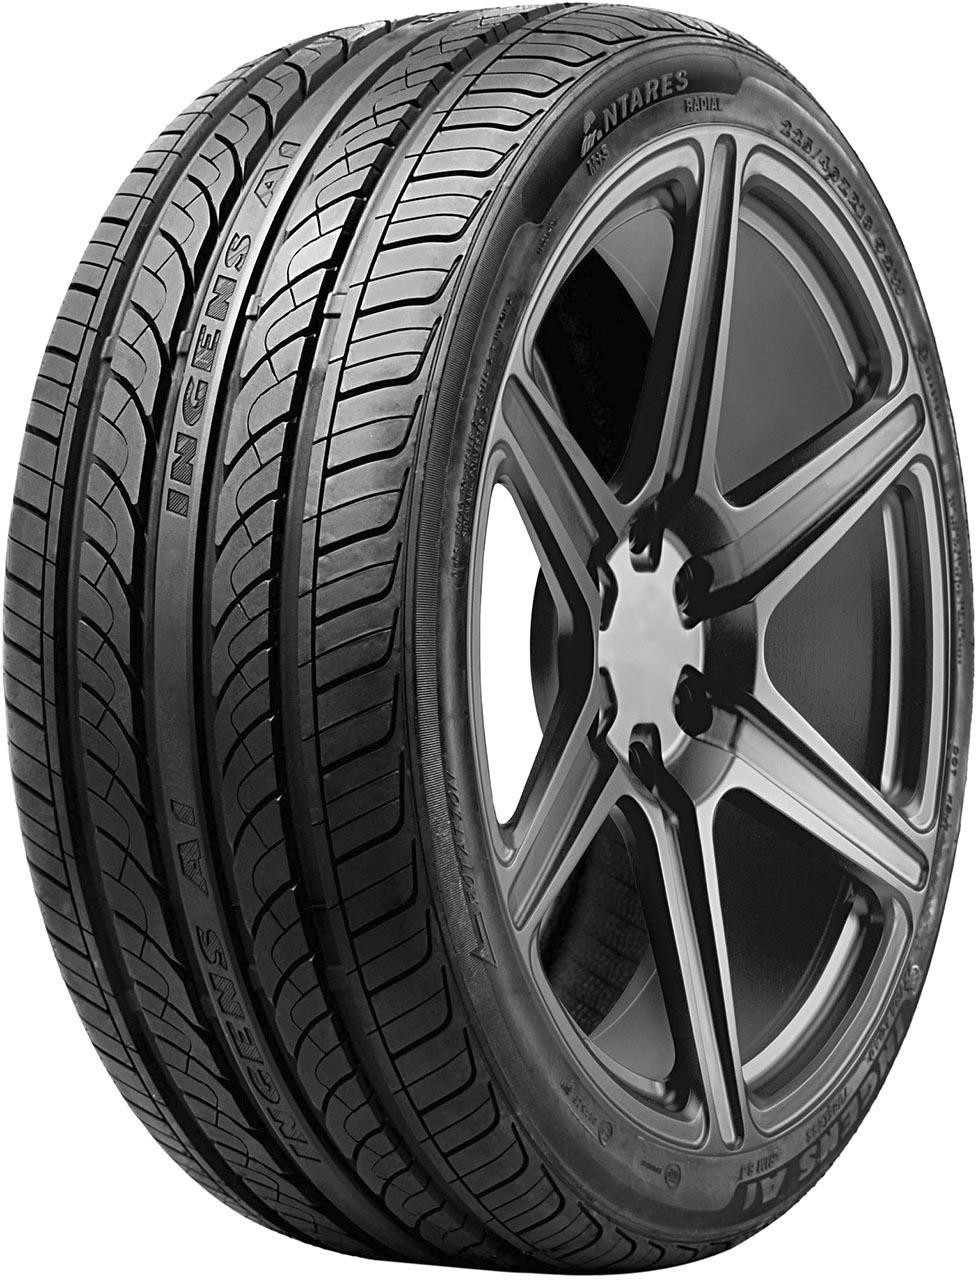 Antares Tires Ingens A1 245/40 R17 95W XL